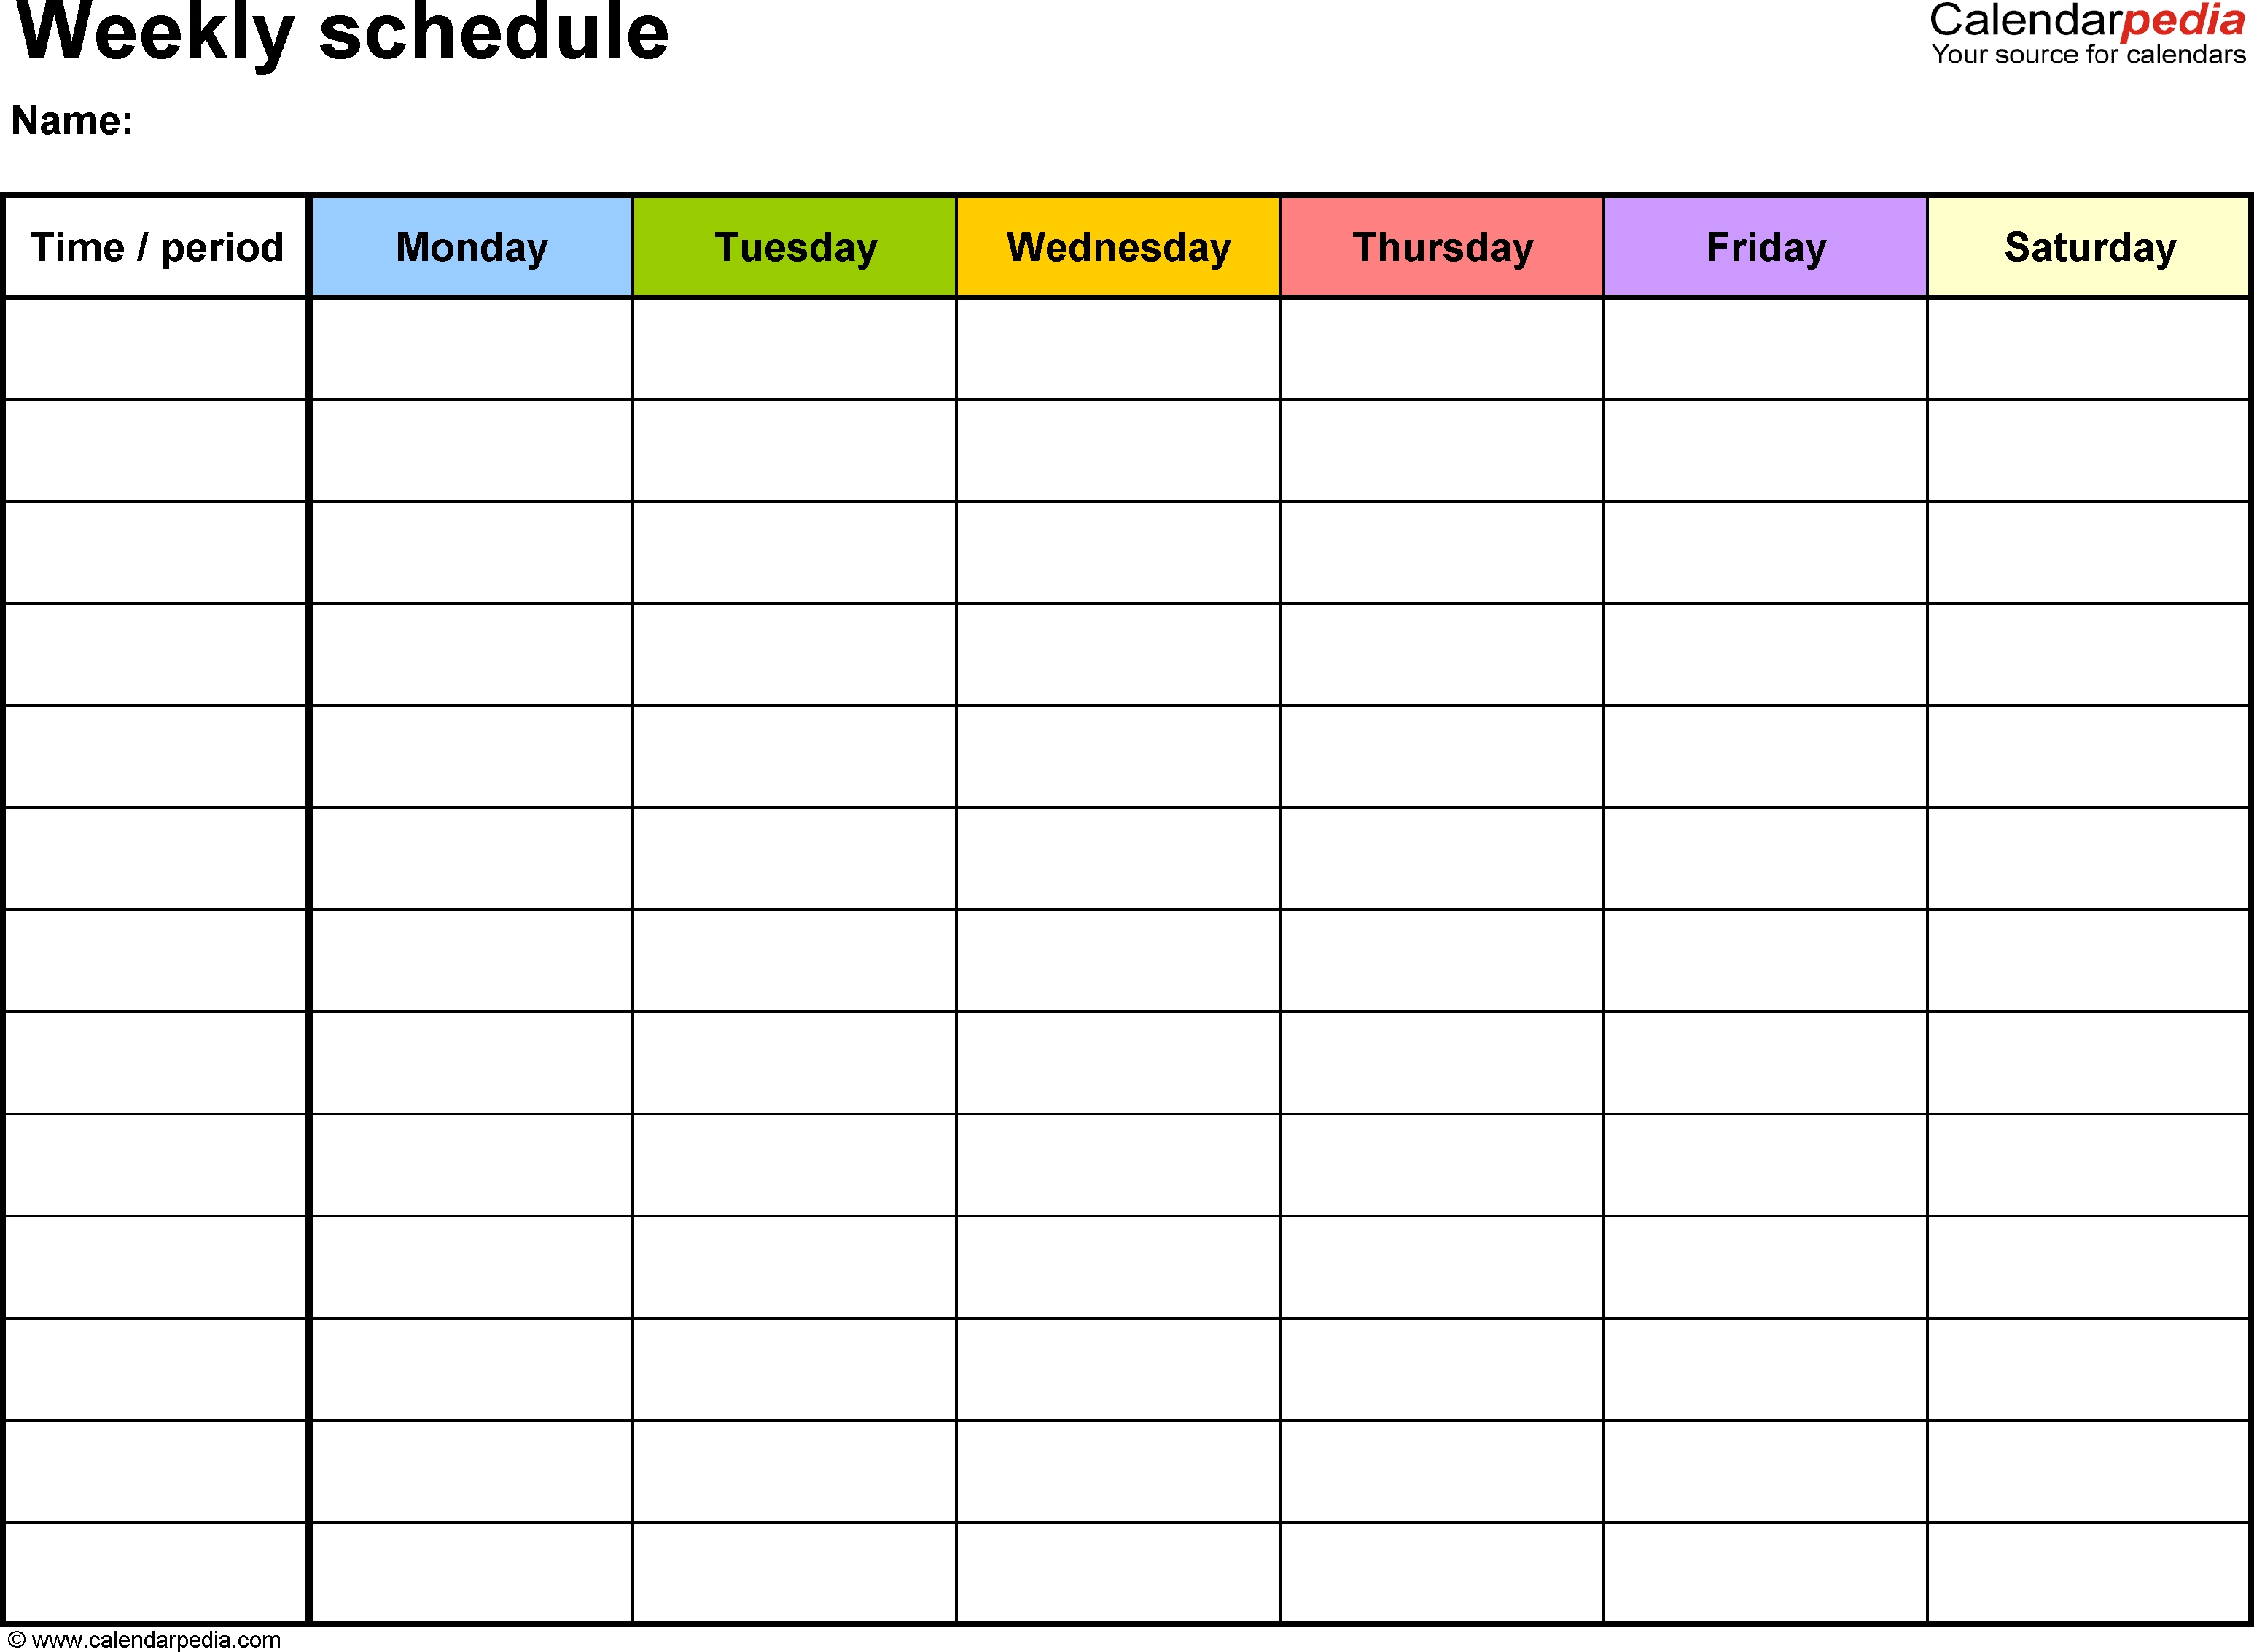 Free Weekly Schedule Templates For Word - 18 Templates-Mon To Friday Monthly Calendar Templates